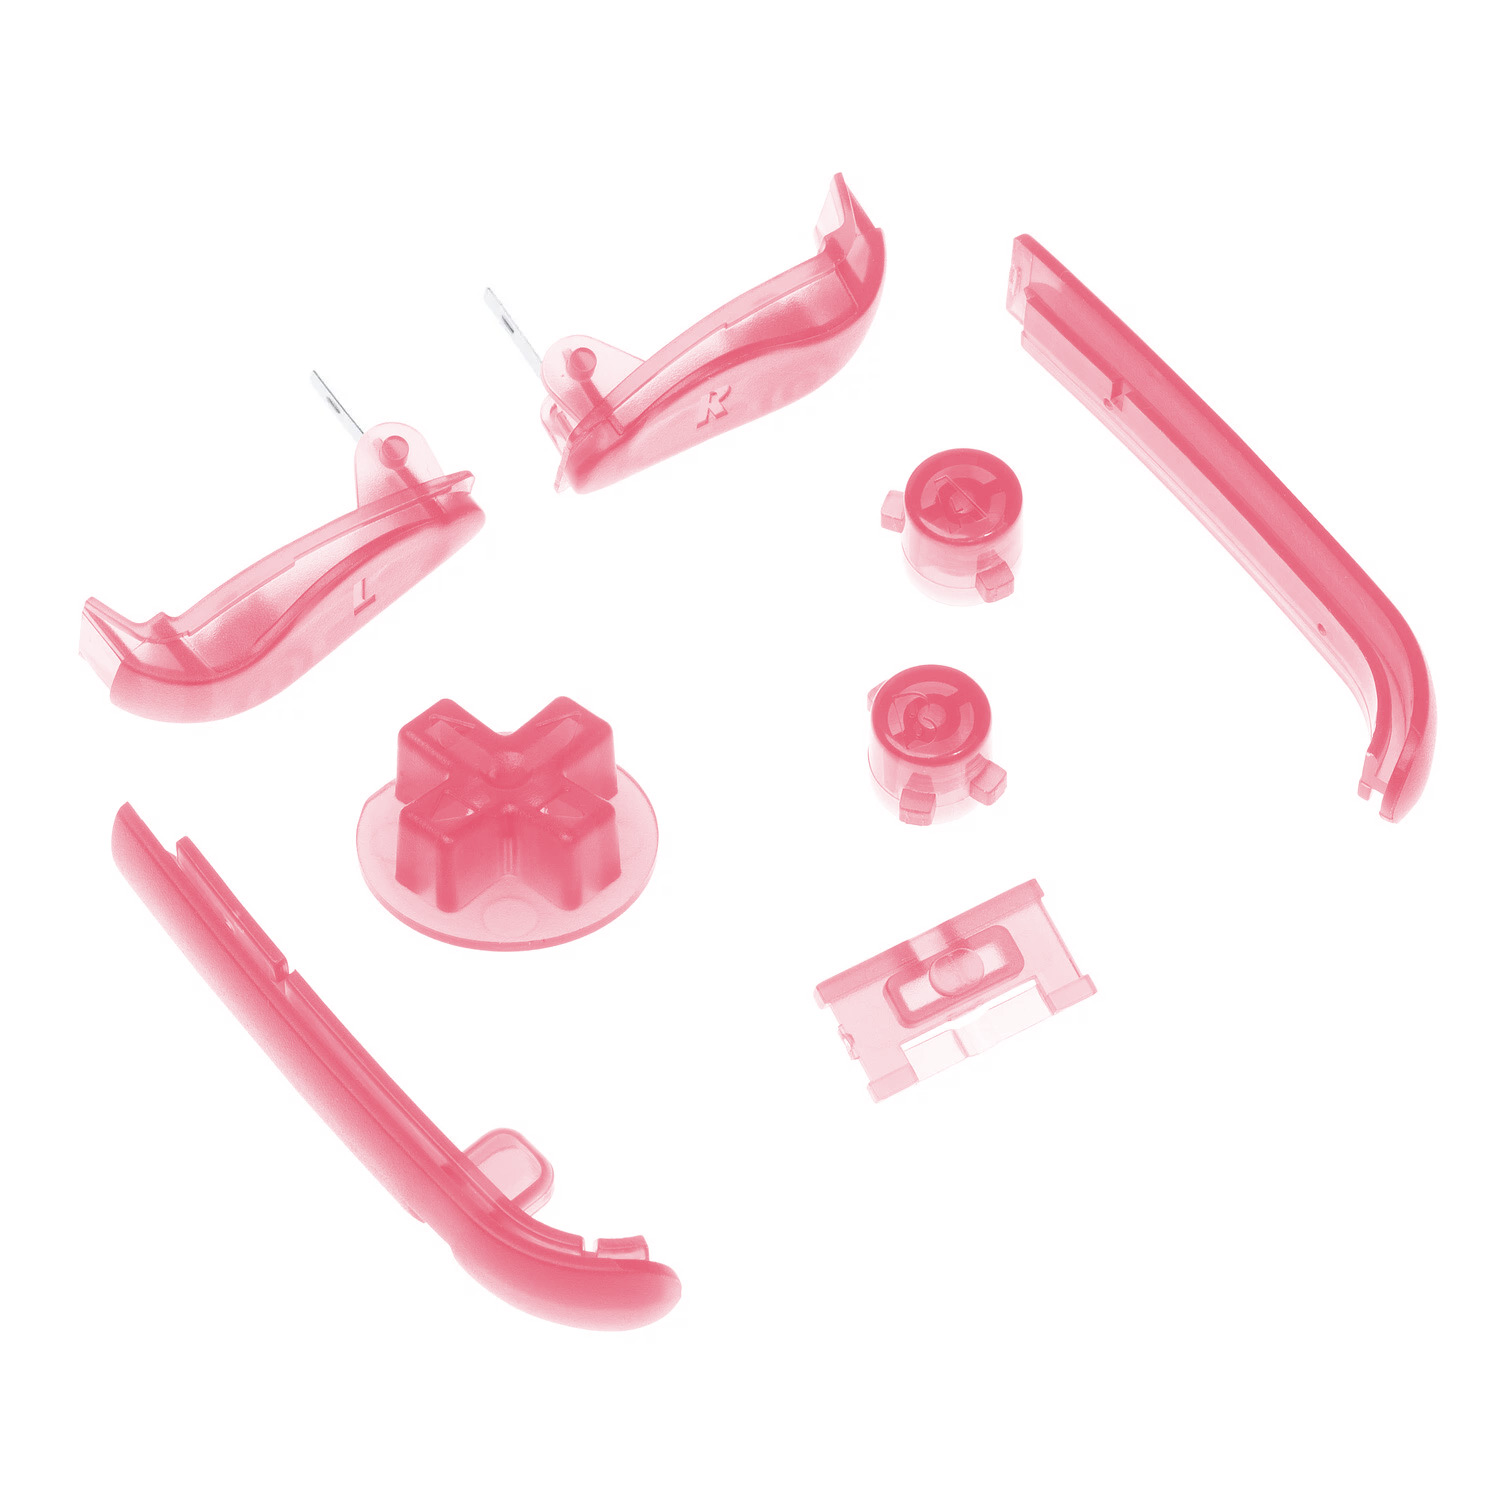 Game Boy Advance Buttons (Pink Clear)